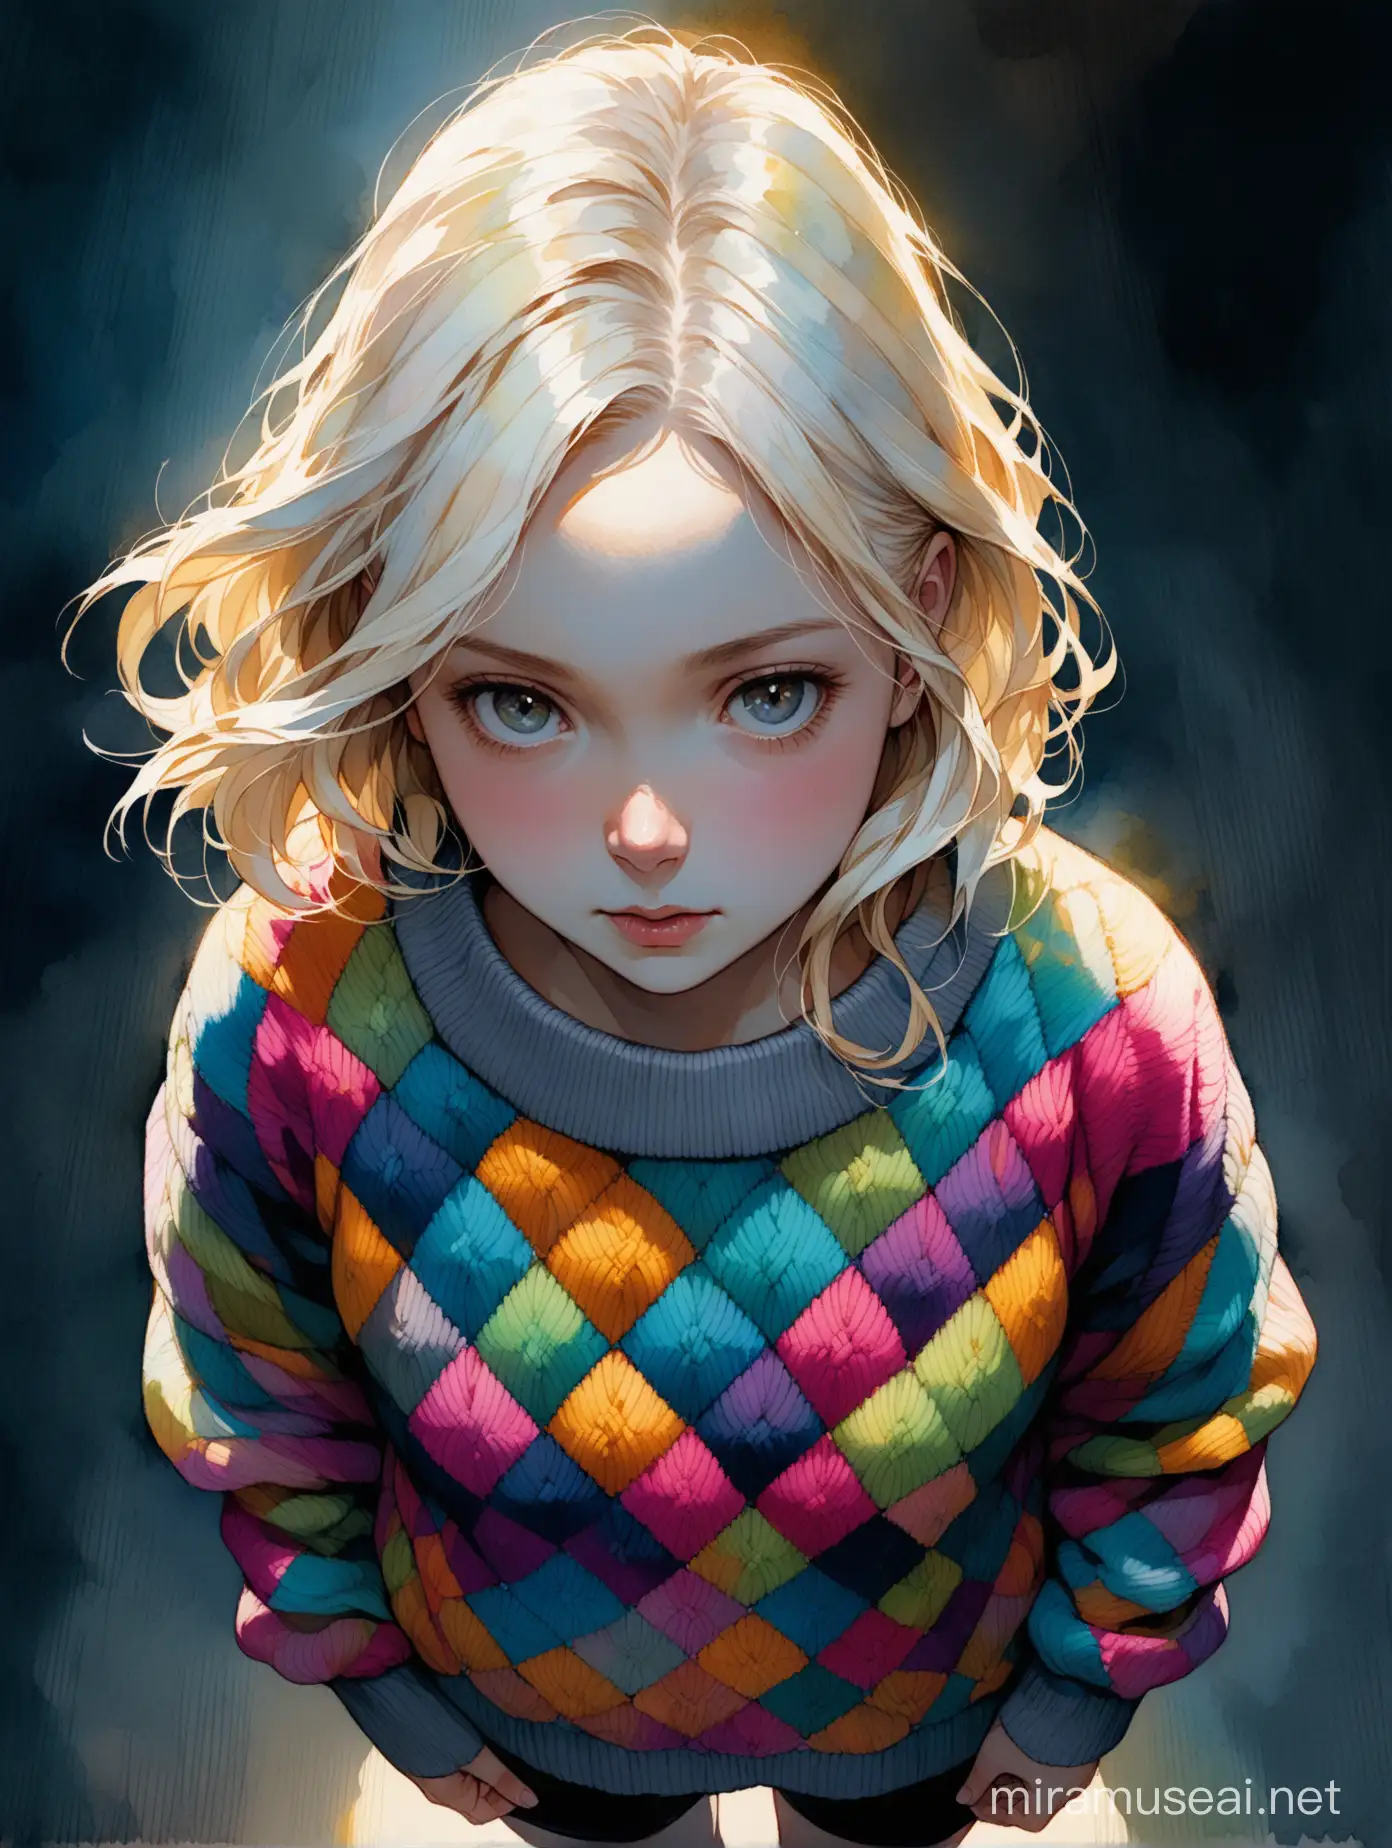 lex Maleev illustration depicting young Emma Myers as Enid Sinclar wearing colorful patchwork knit sweater, short wavy white blond hair with pinkish tips, chiaroscuro, dramatic lighting, messy watercolor, no distortion, gray palette, insanely high detail, very high quality, seen from above
